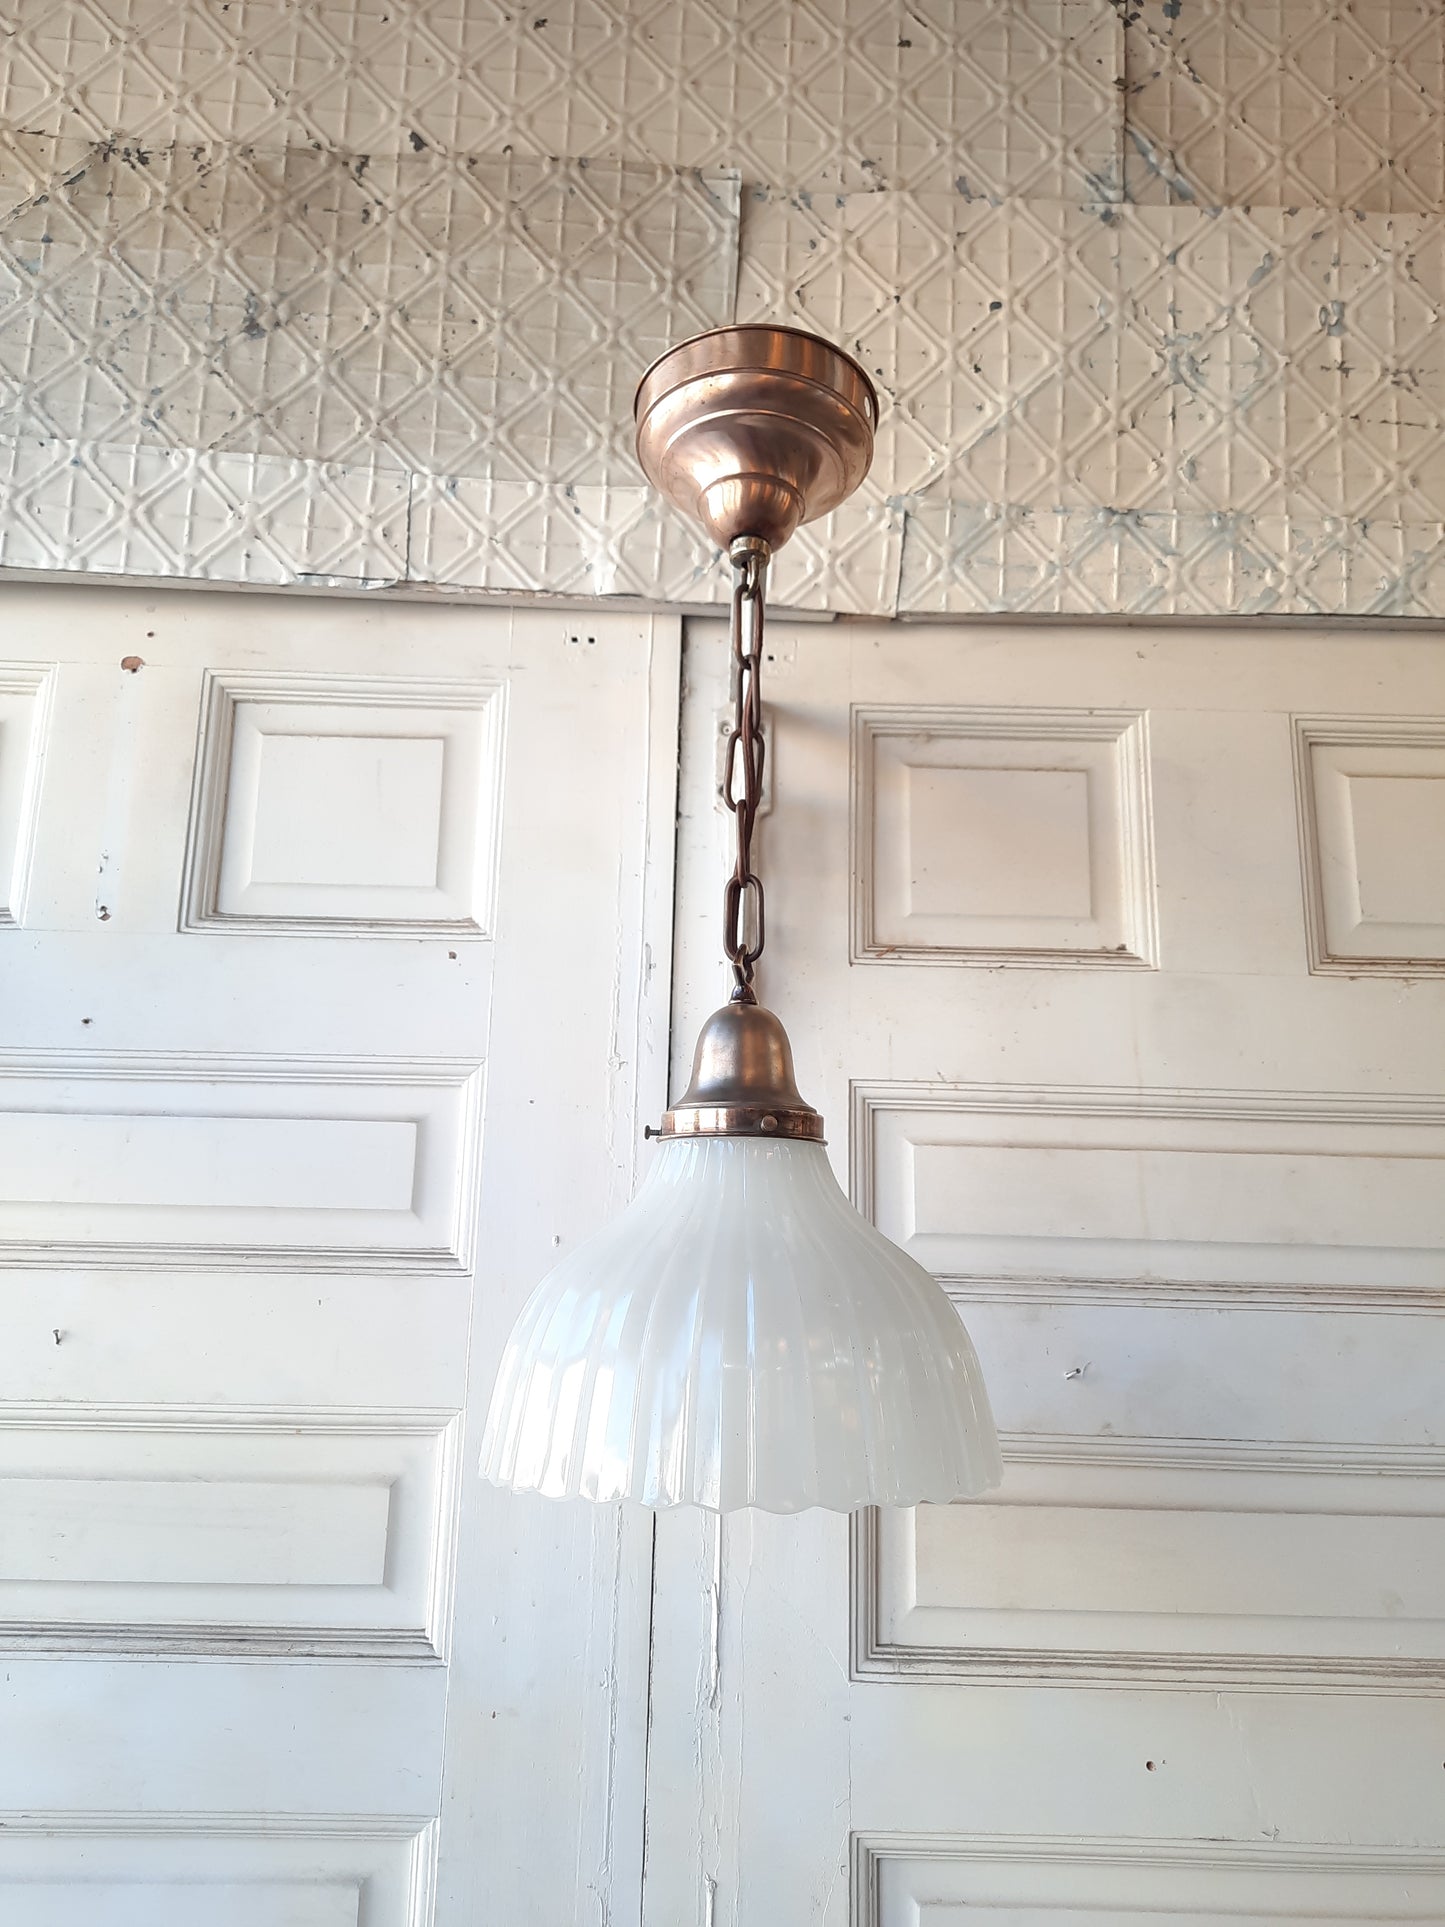 Antique Tulip Shade Pendant Light, Hanging Vintage Light with White Glass Shade with Fluted Edges 121201